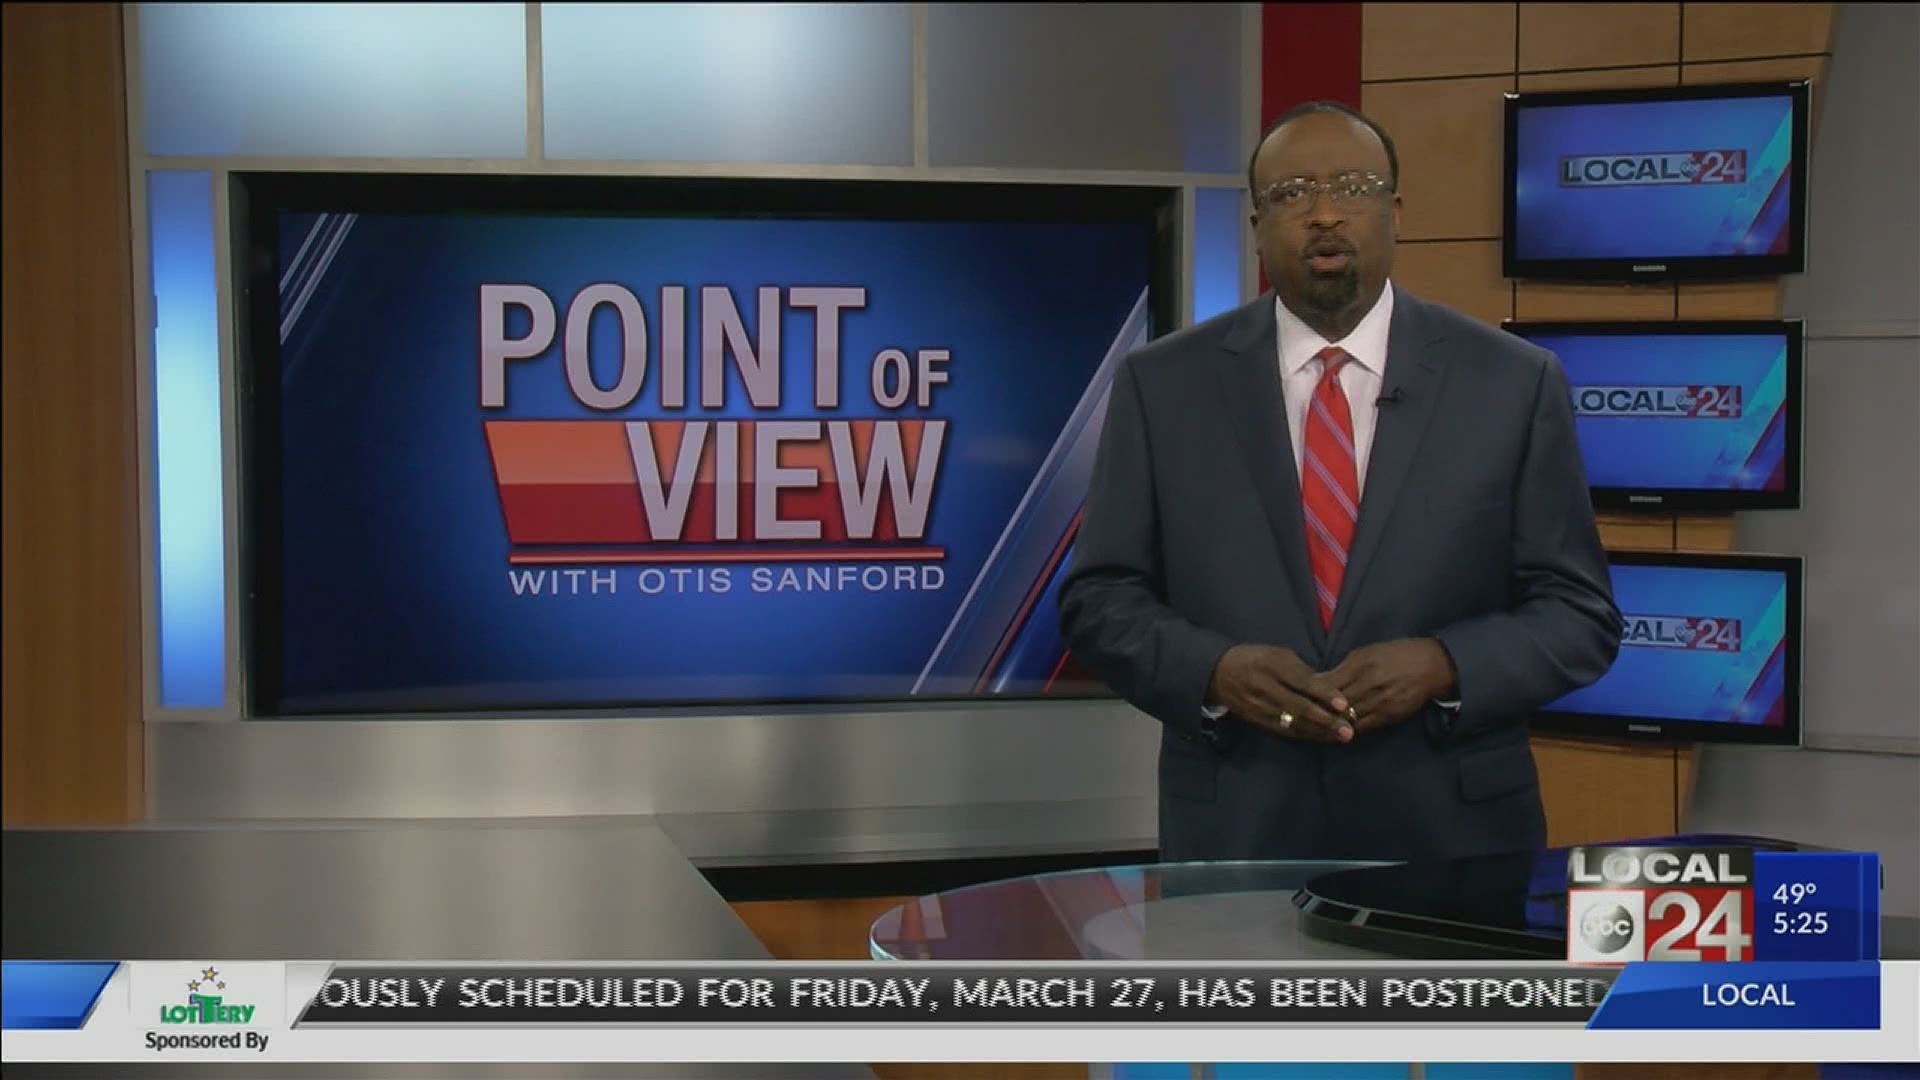 Local 24 News commentator and political analyst Otis Sanford explains why